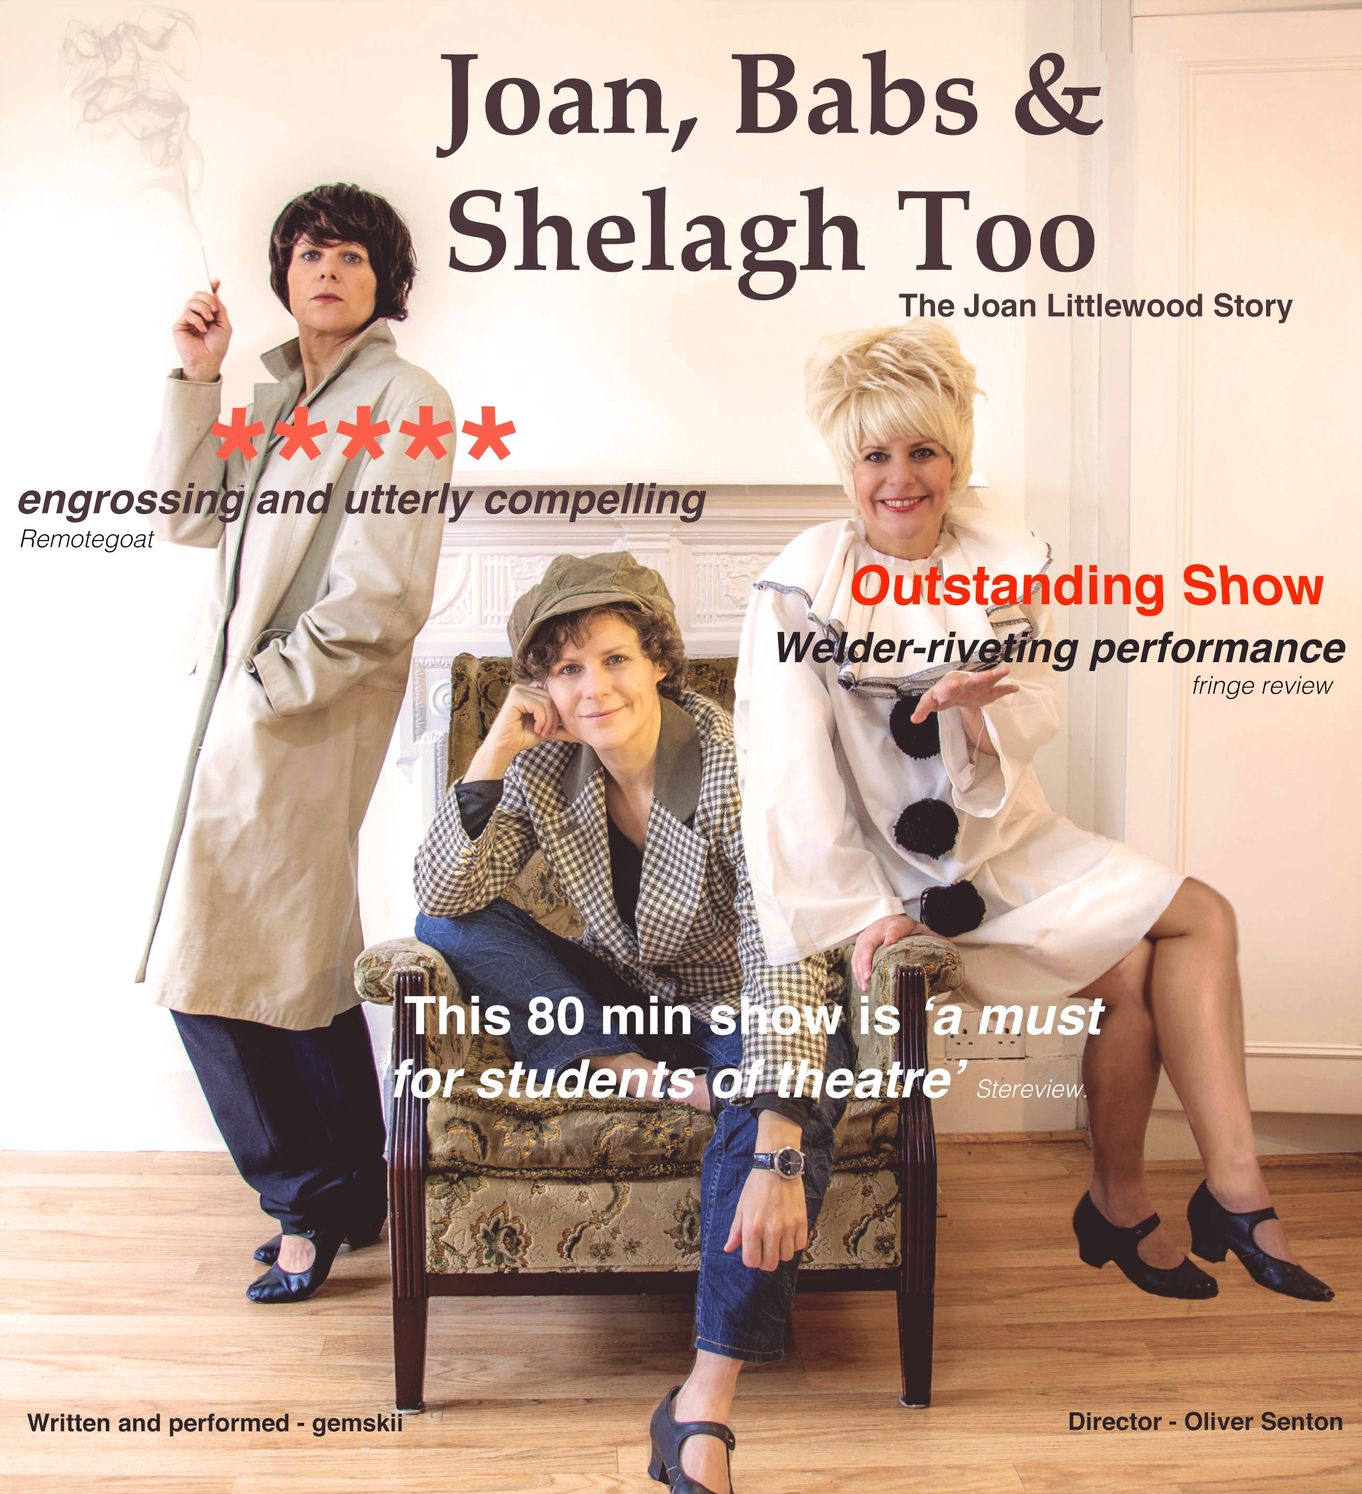 Joan, Babs & Shelagh Too - the Joan Littlewood story